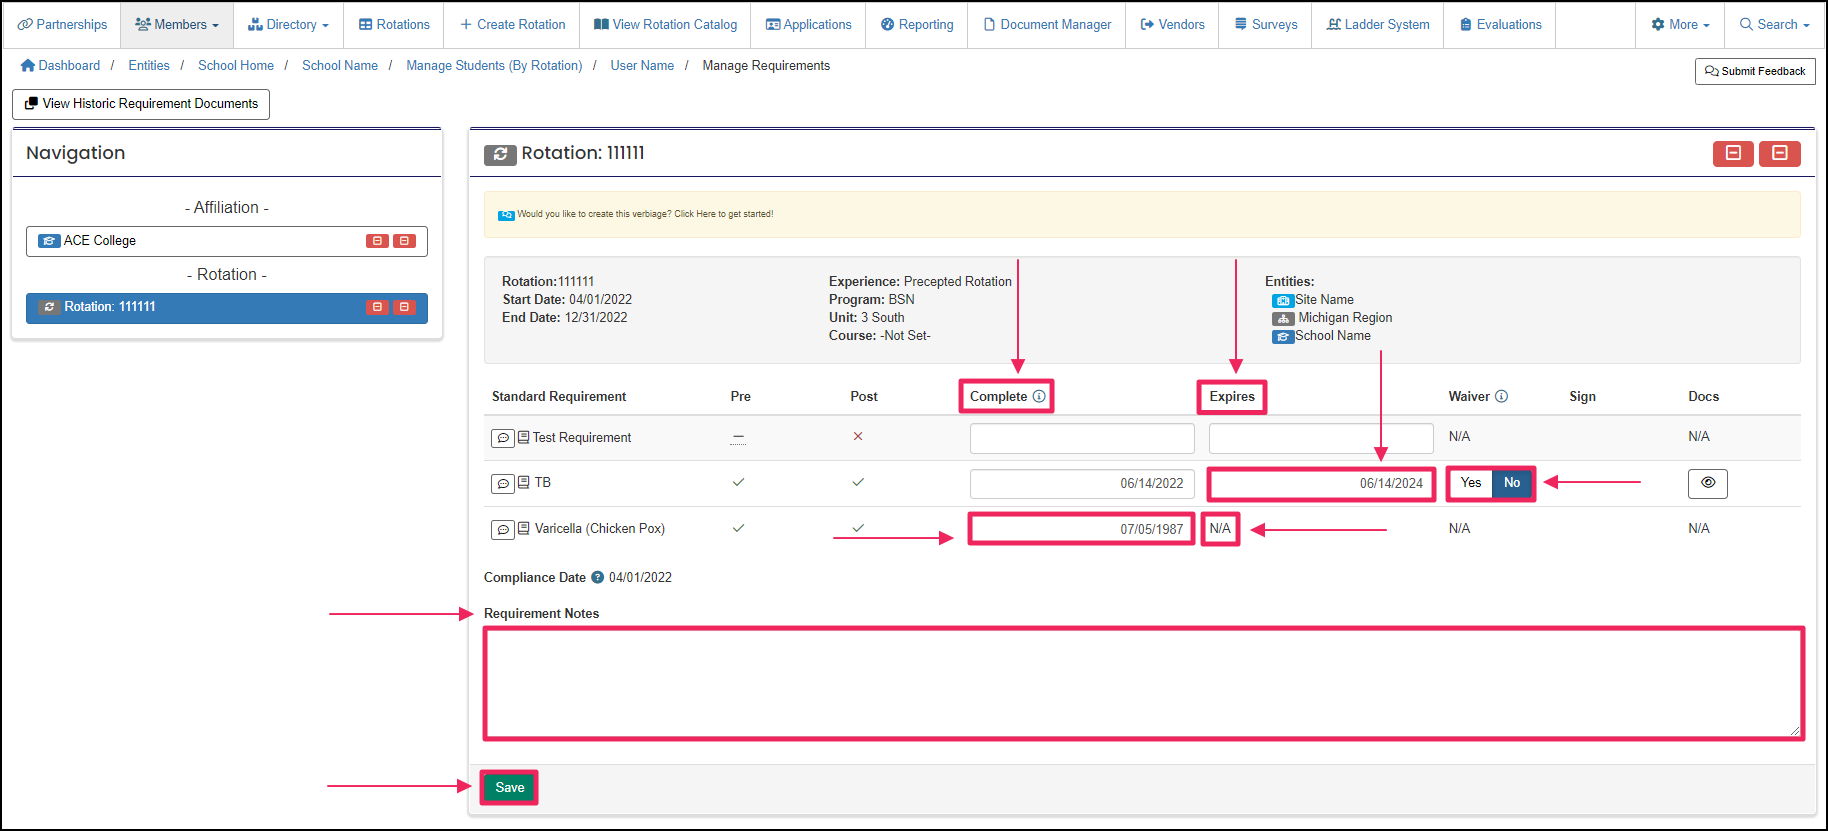 Requirements page highlighting Complete and Expiration date column/fields, Requirement Notes area, and Save button